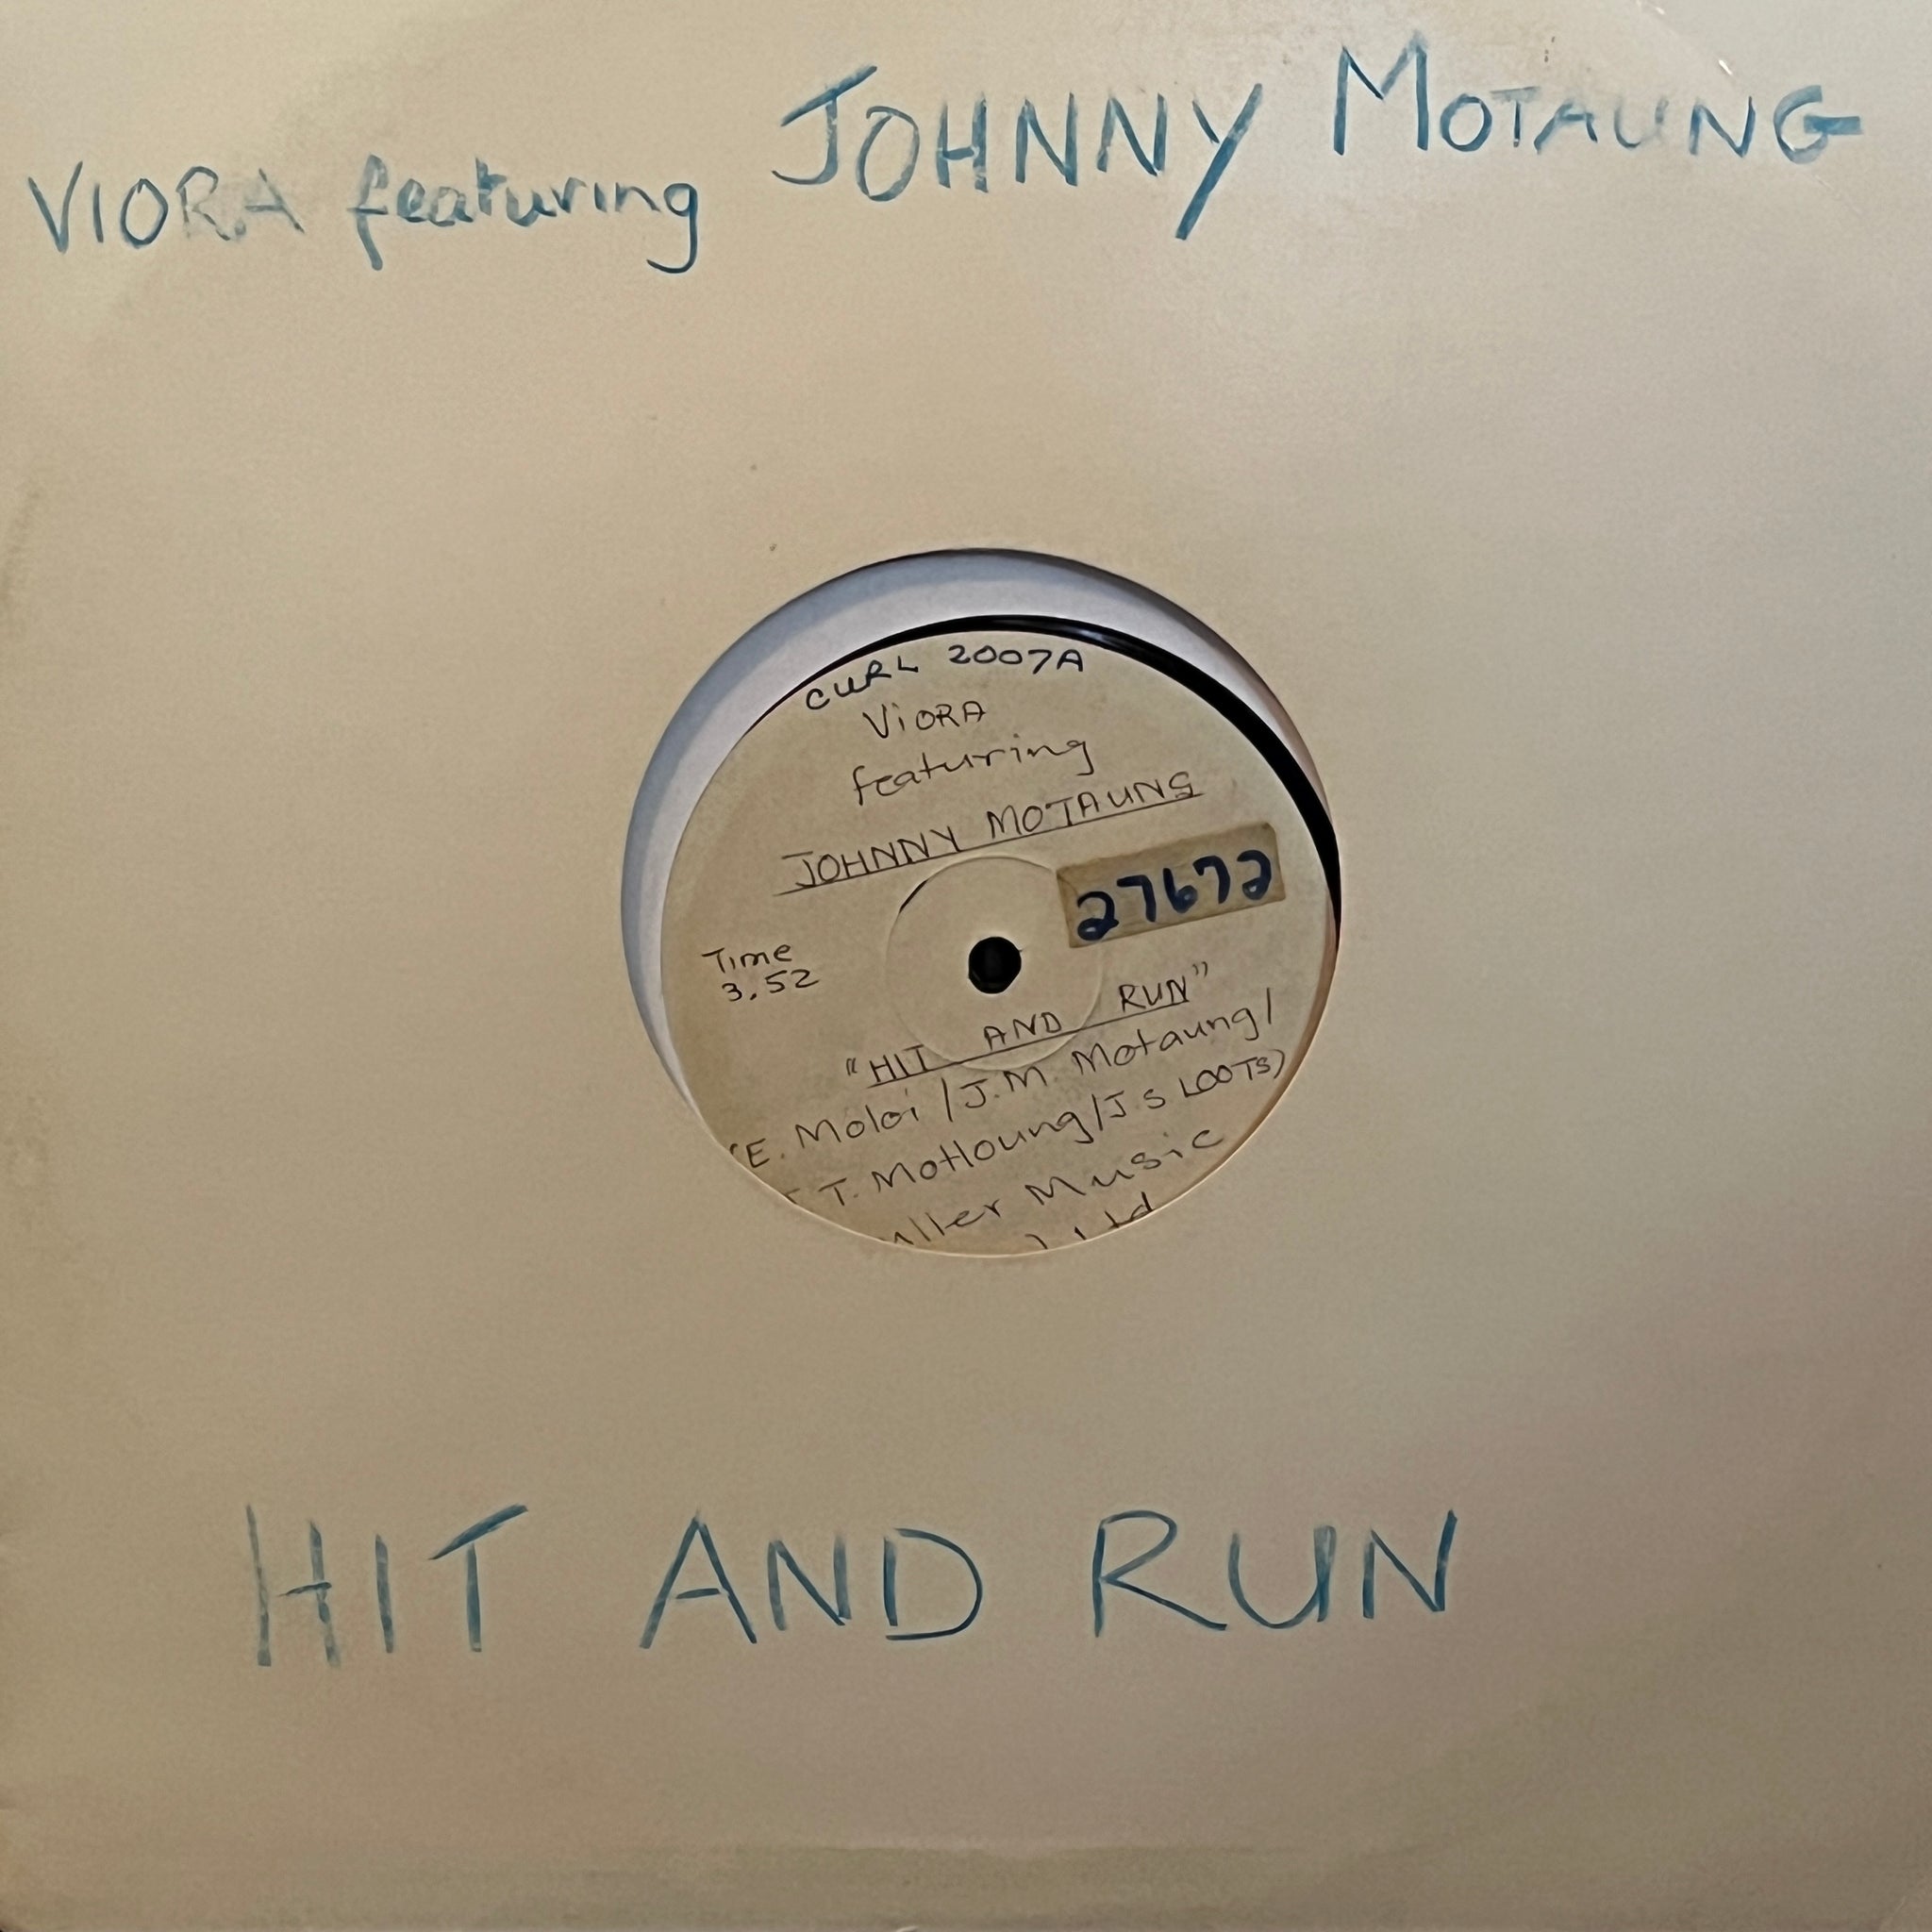 Viora Featuring Johnny Motaung – Hit And Run